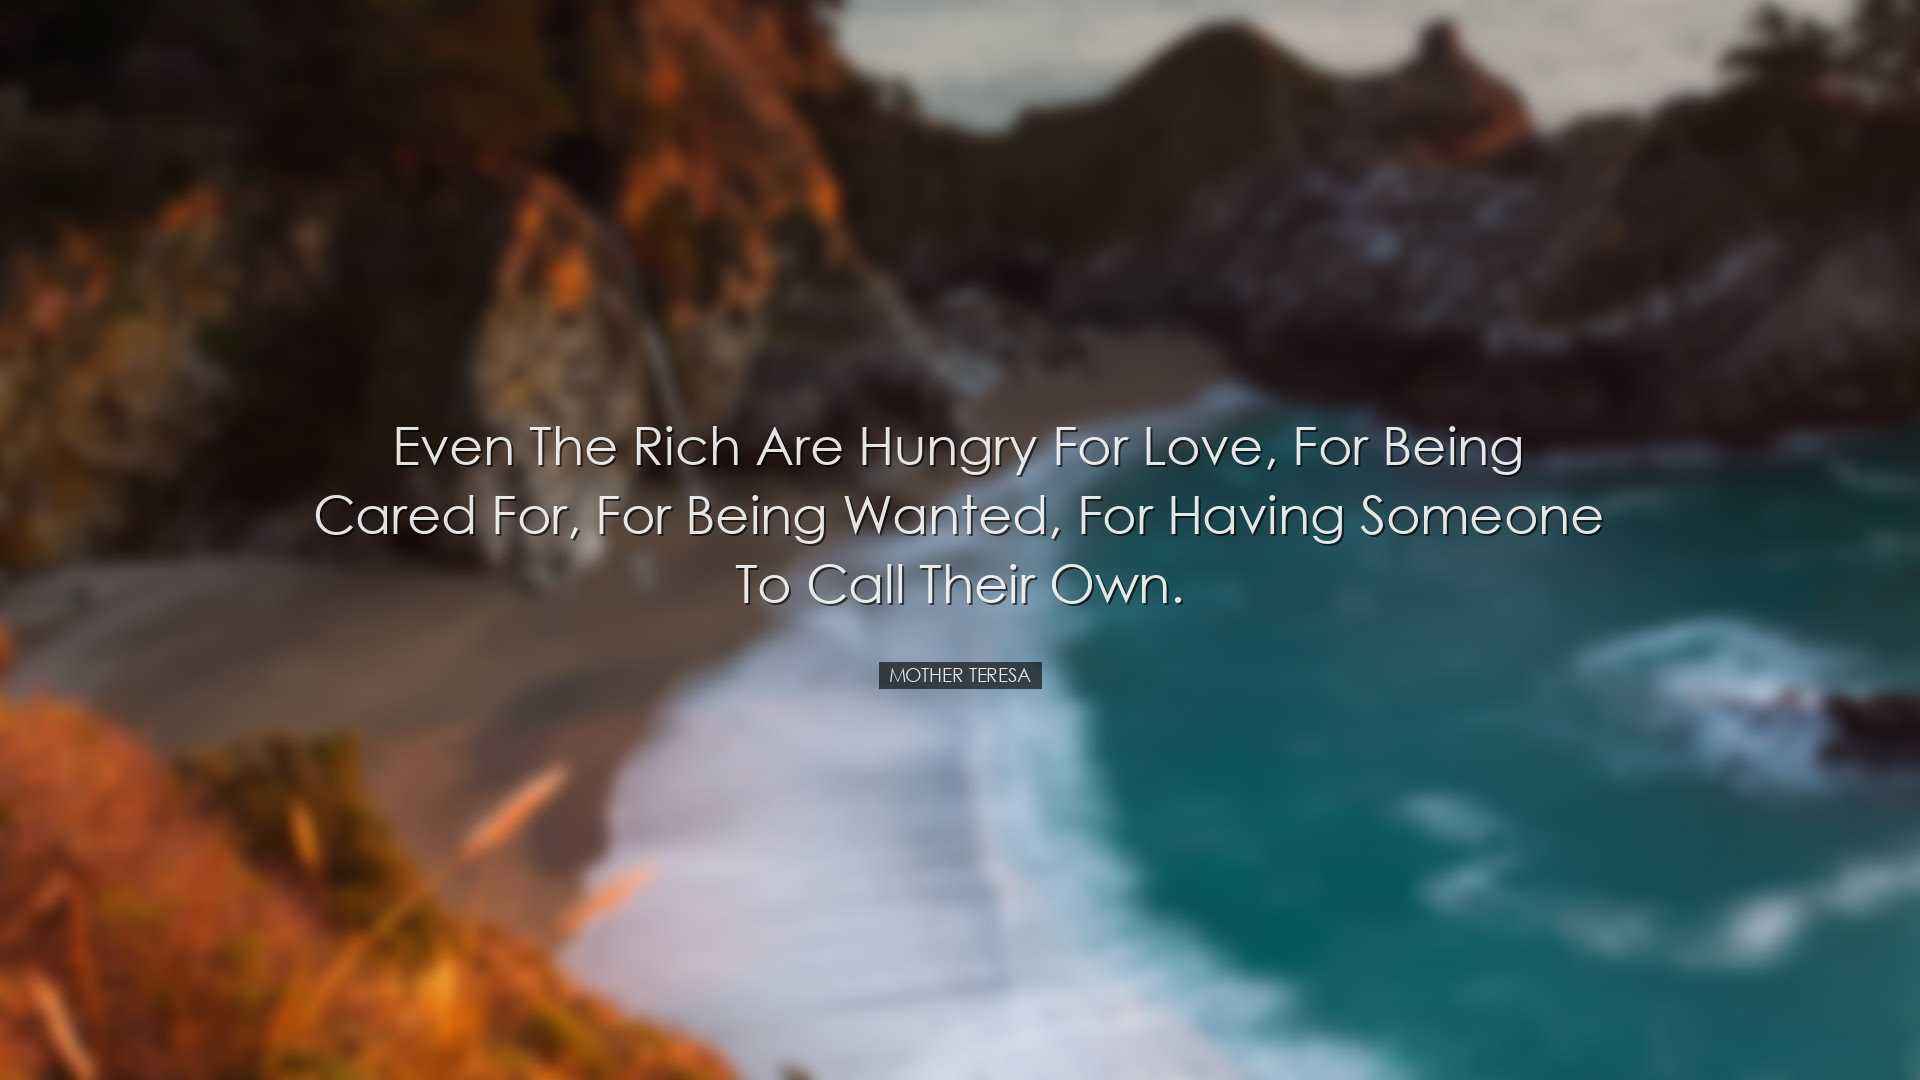 Even the rich are hungry for love, for being cared for, for being